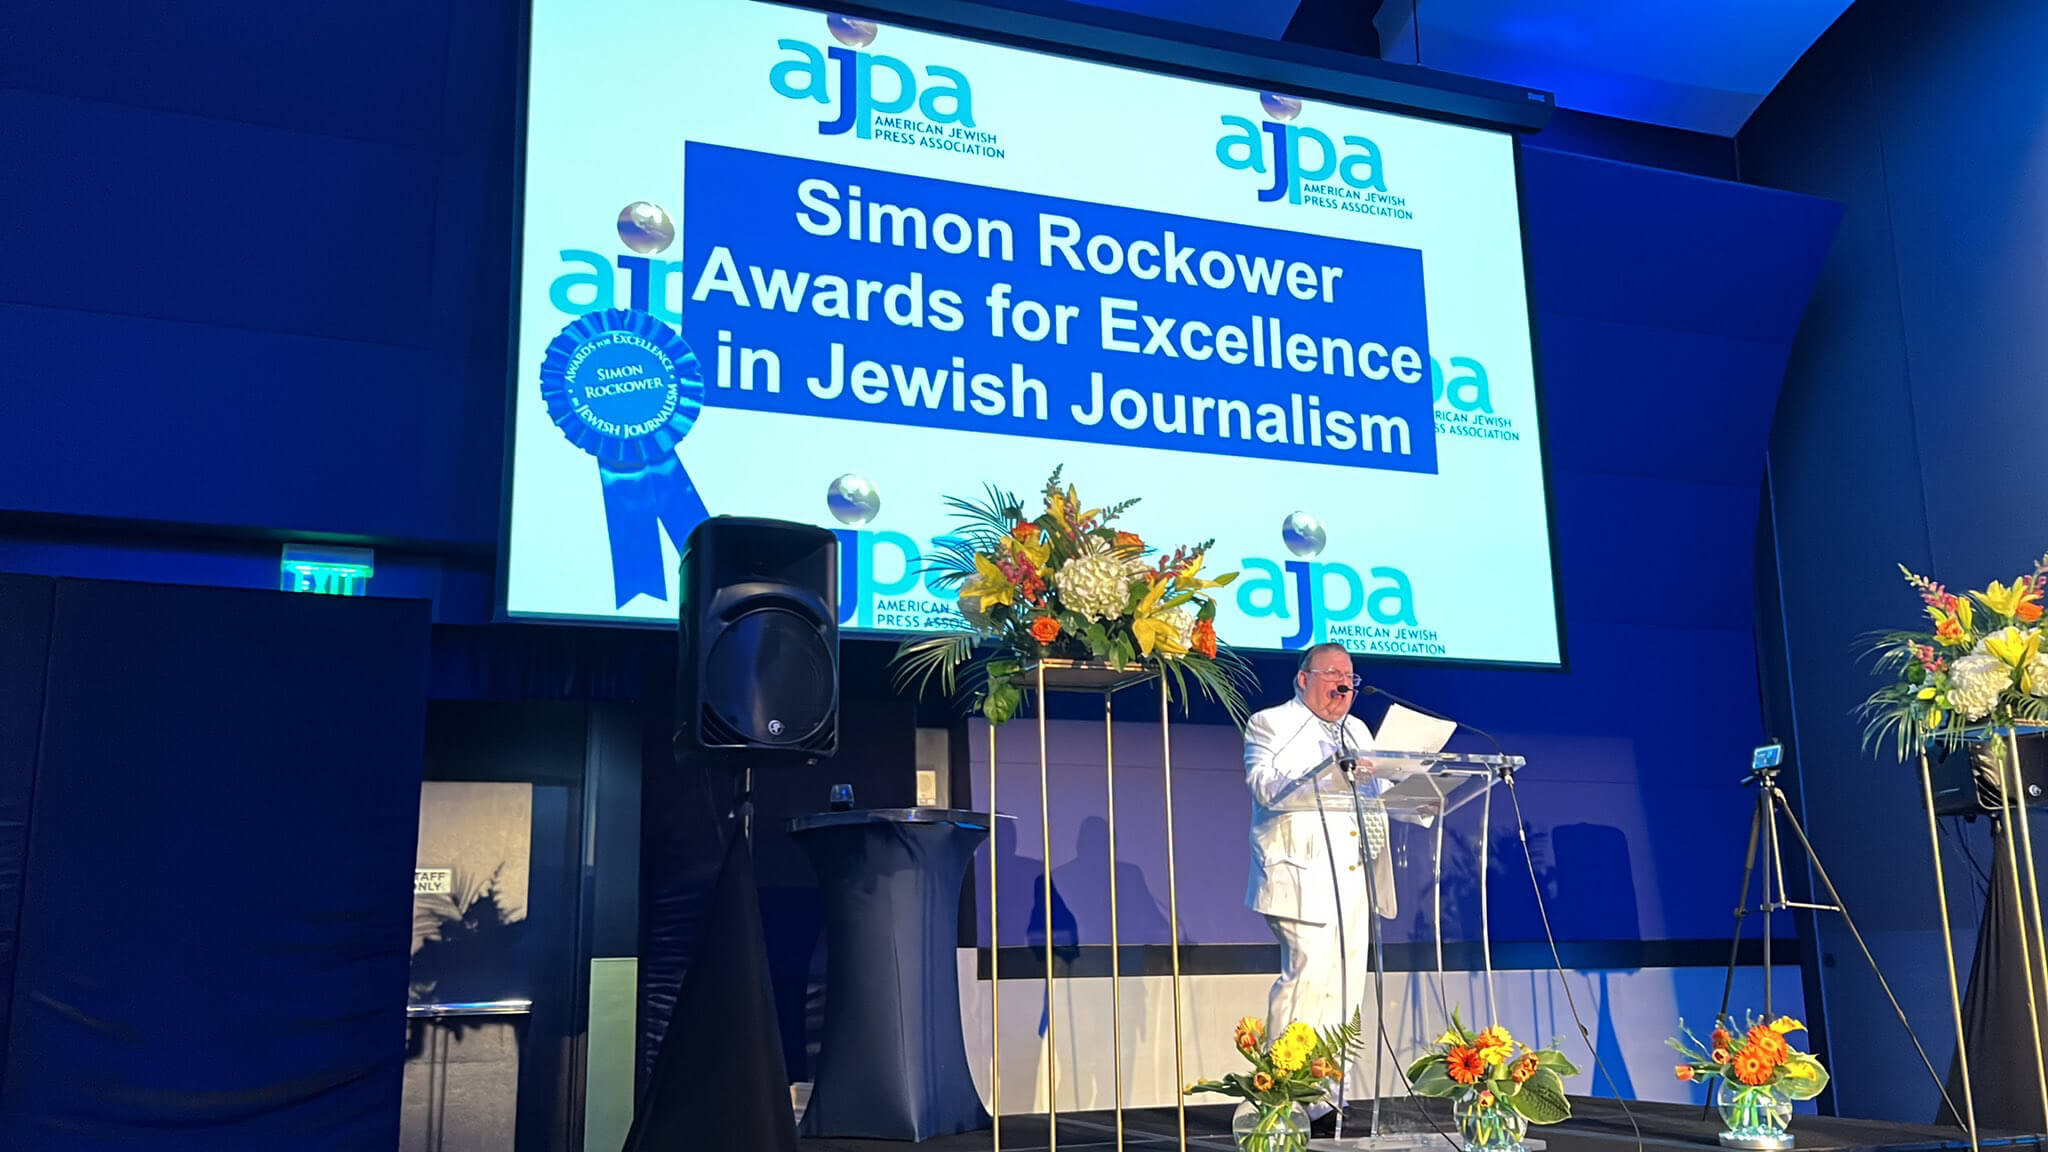 The Forward won 43 Simon Rockower Awards for Excellence in Jewish Journalism at the 41st American Jewish Press Association's annual ceremony for work published in 2021.